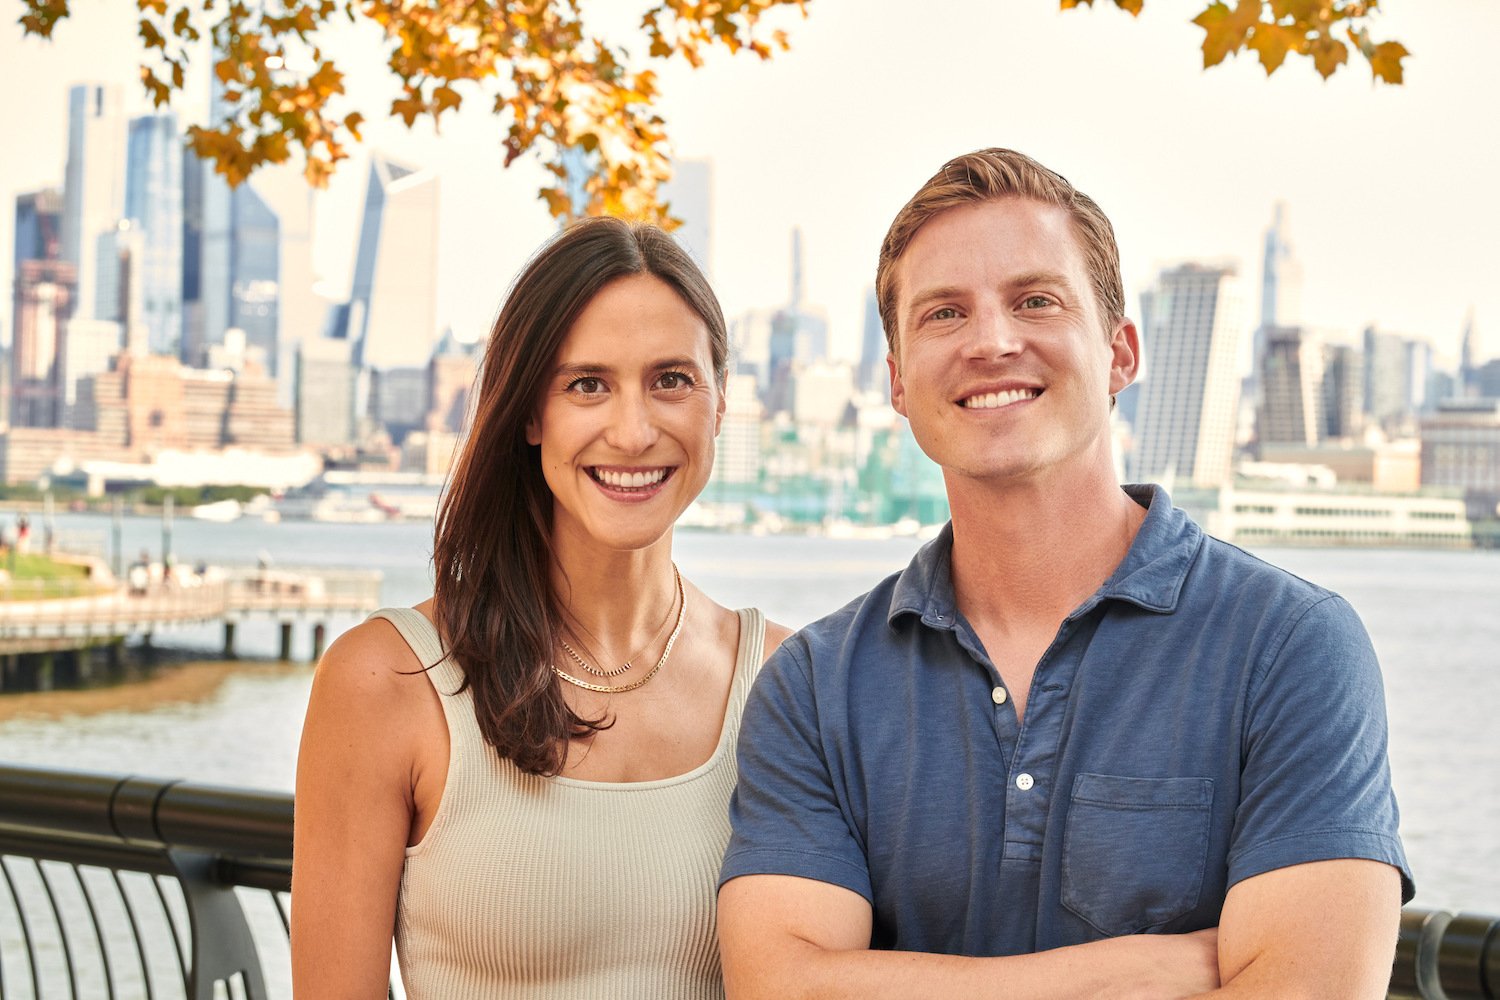 Marker Learning co-founders Emily Yudofsky (left) and Stefan Bauer (right) post for a photo in front of the NYC skyline.